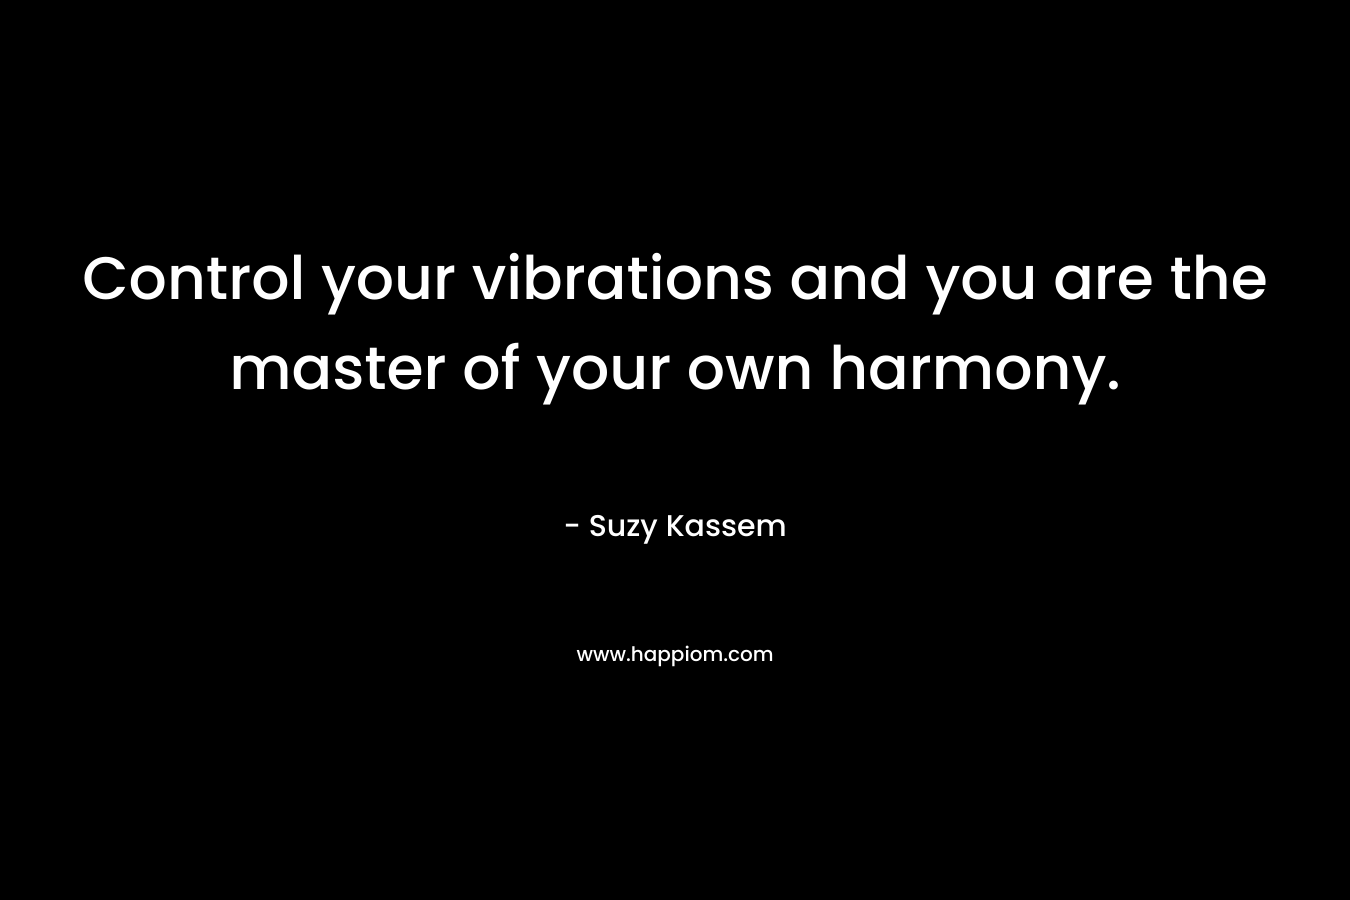 Control your vibrations and you are the master of your own harmony. – Suzy Kassem